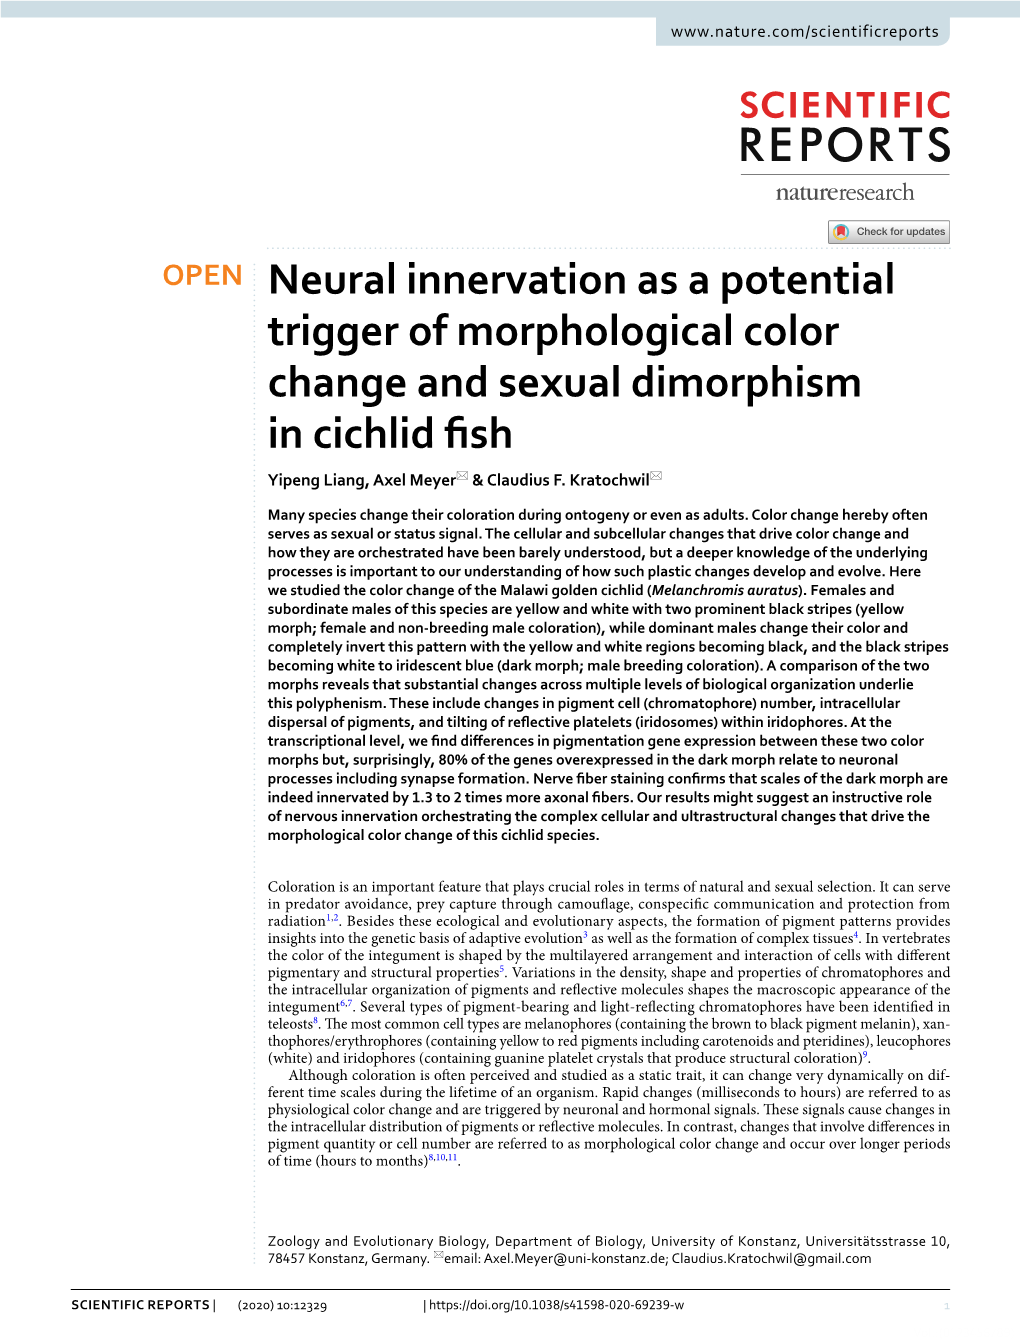 Neural Innervation As a Potential Trigger of Morphological Color Change and Sexual Dimorphism in Cichlid Fsh Yipeng Liang, Axel Meyer* & Claudius F